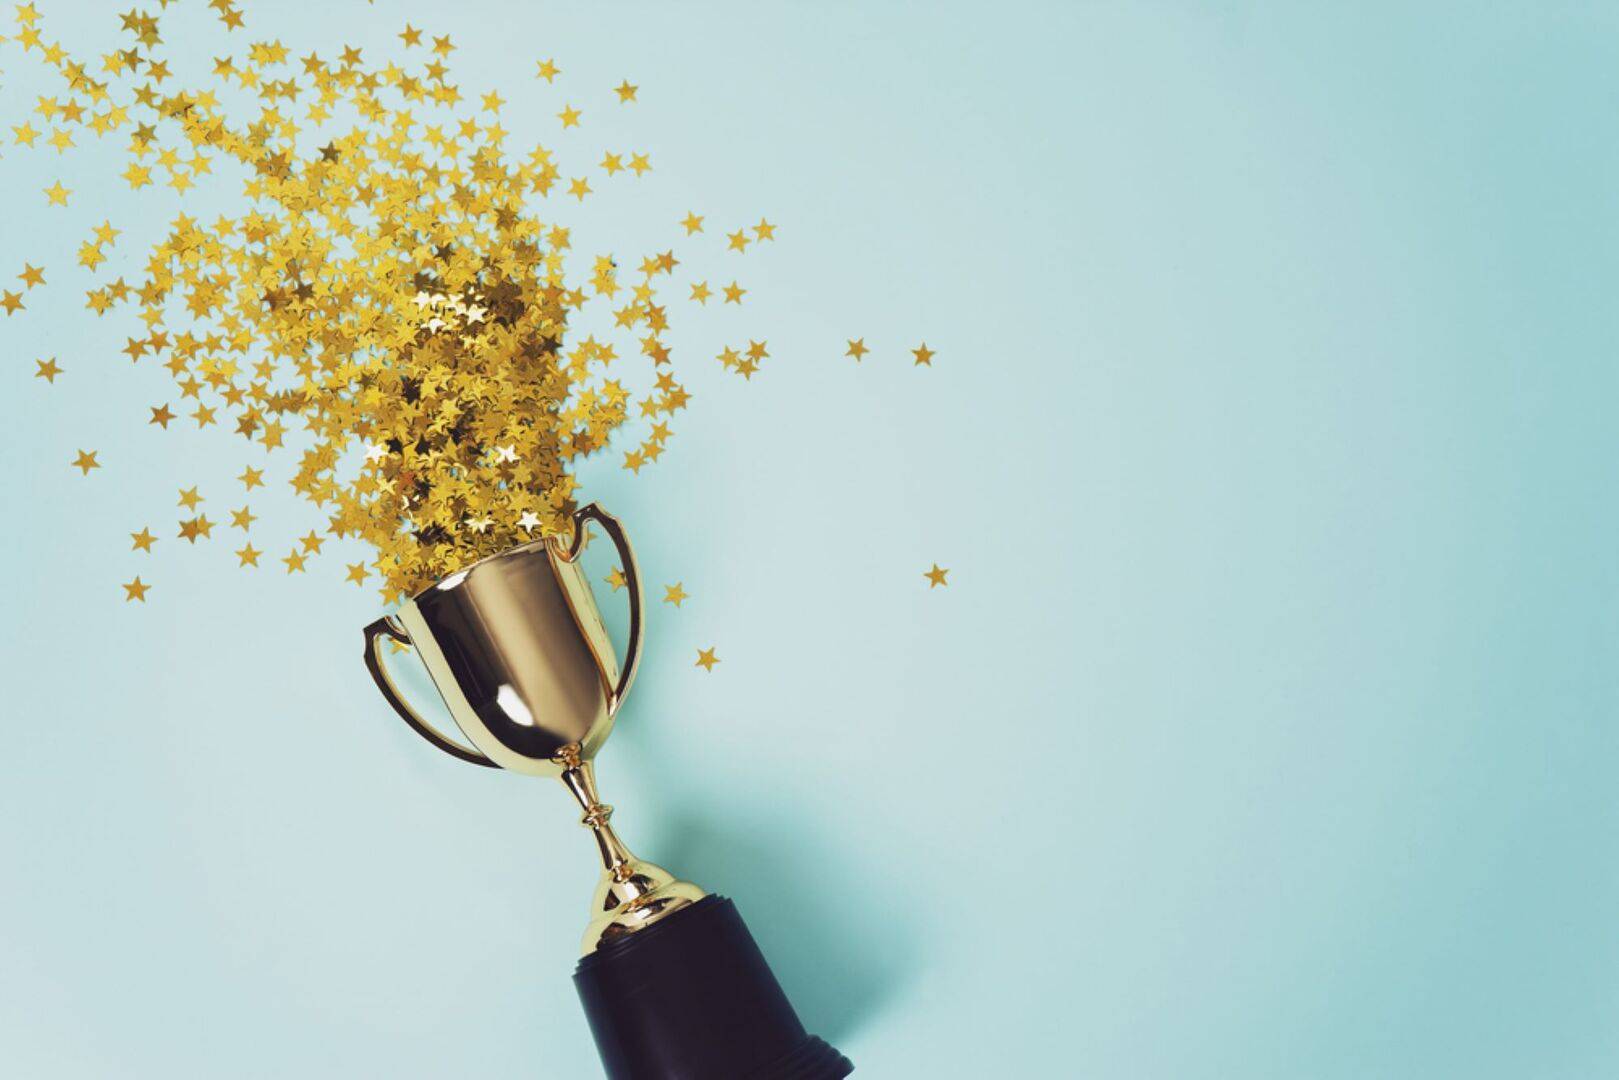 How to leverage B2B award wins for your business